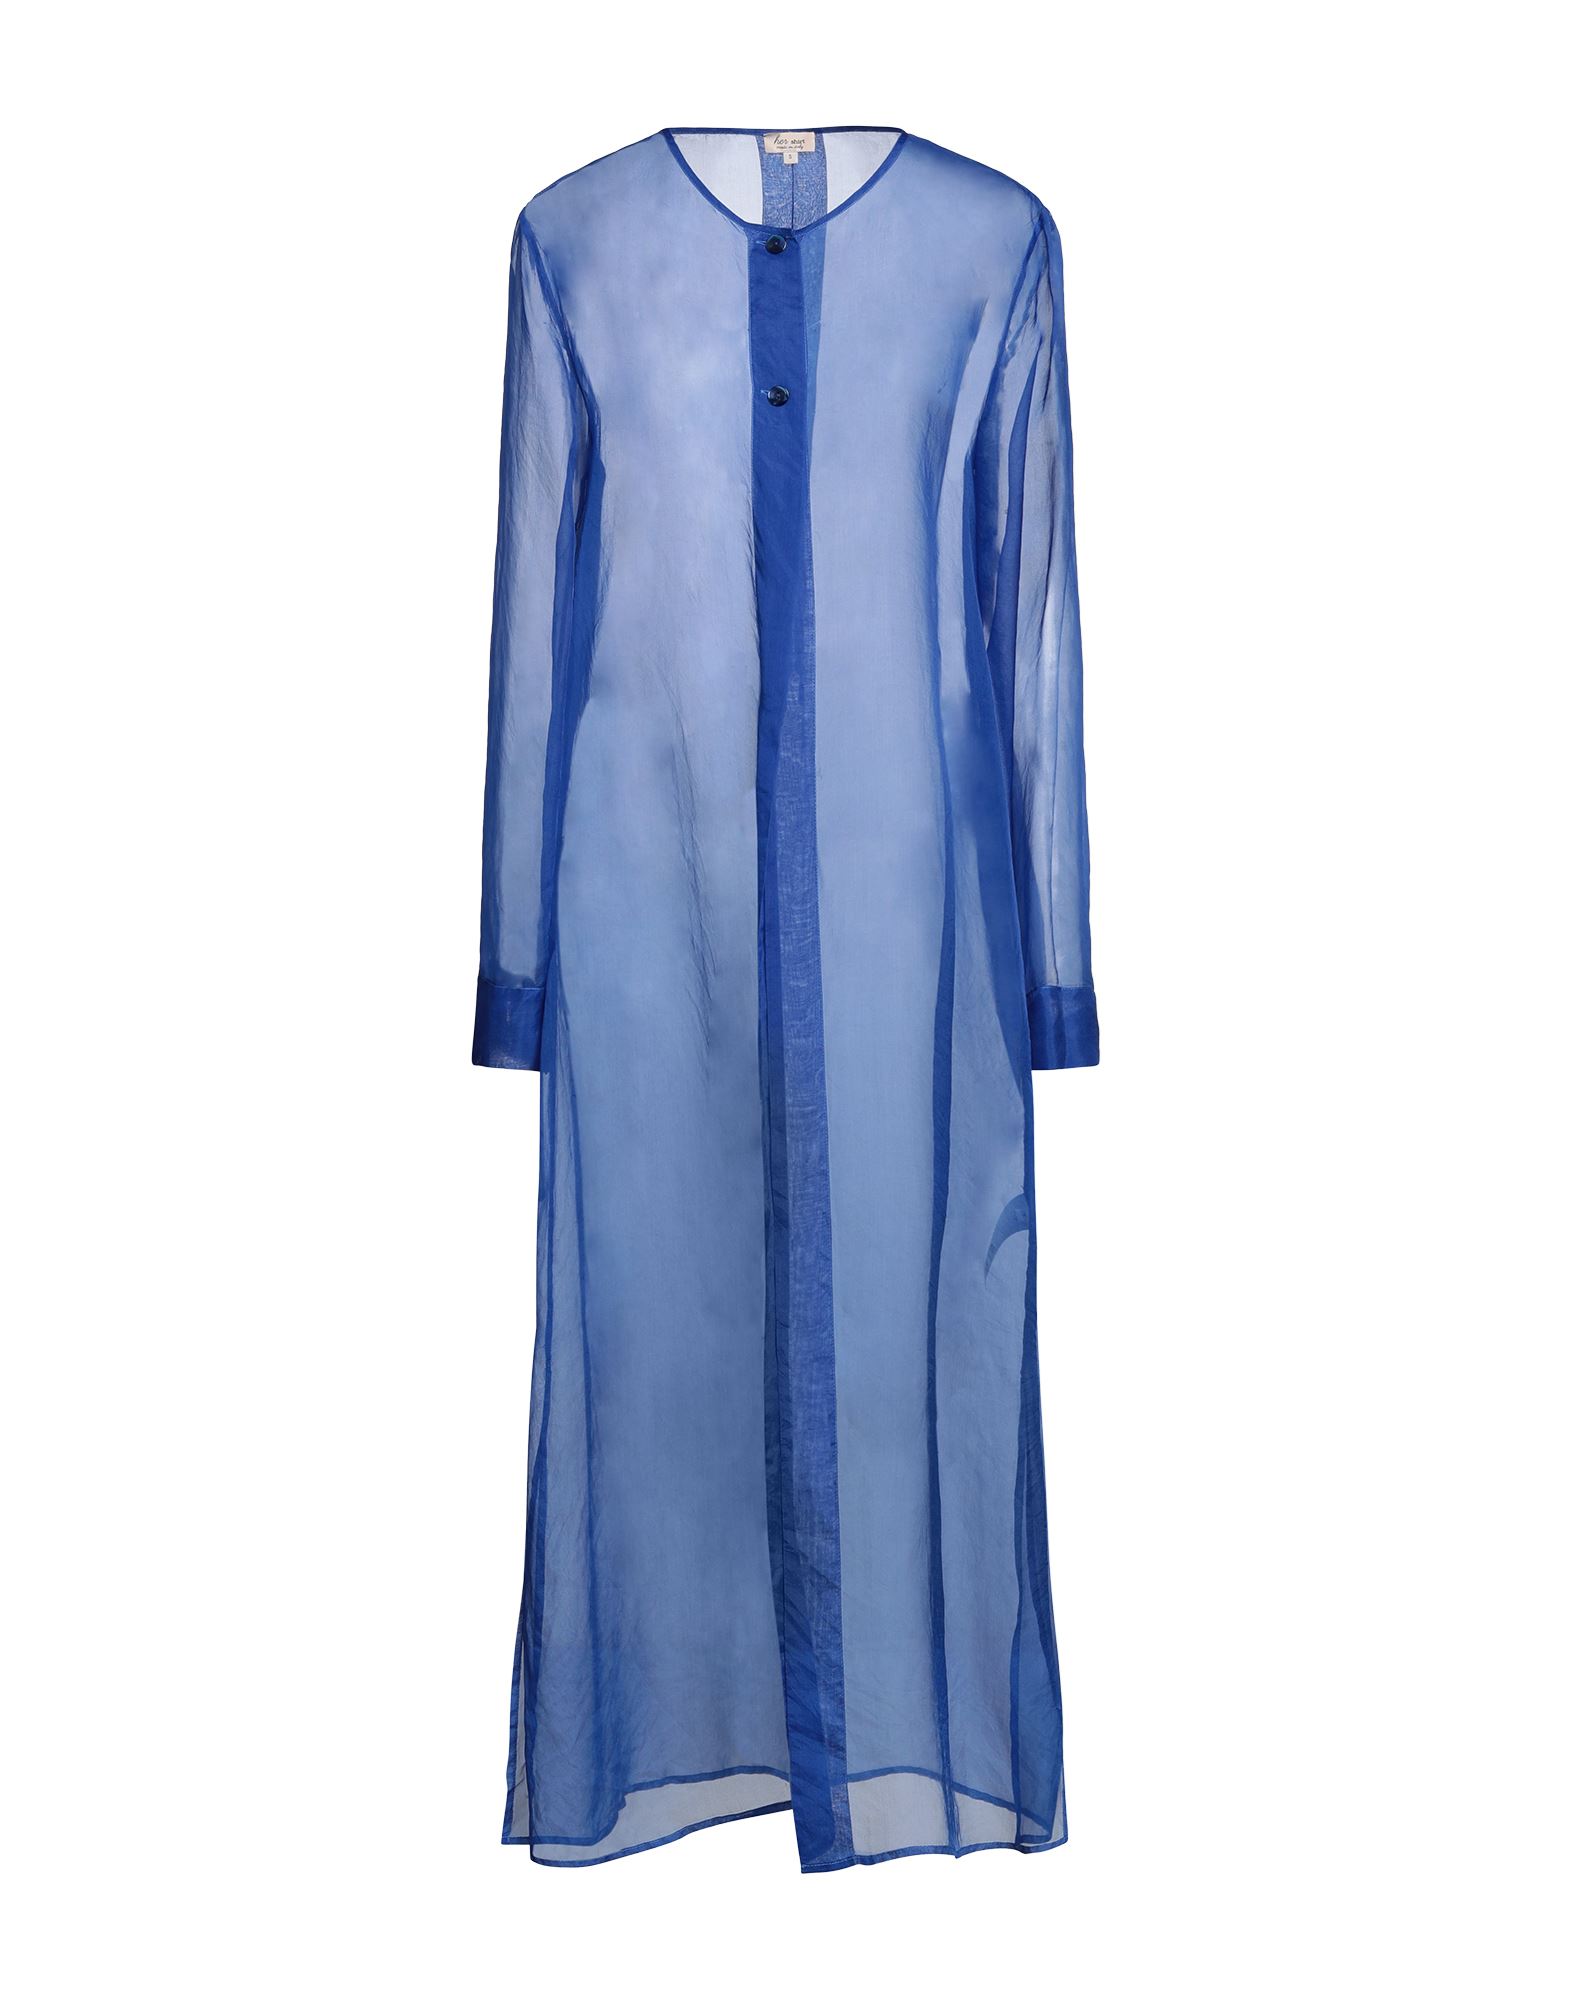 Shop Her Shirt Her Dress Woman Overcoat & Trench Coat Bright Blue Size S Silk